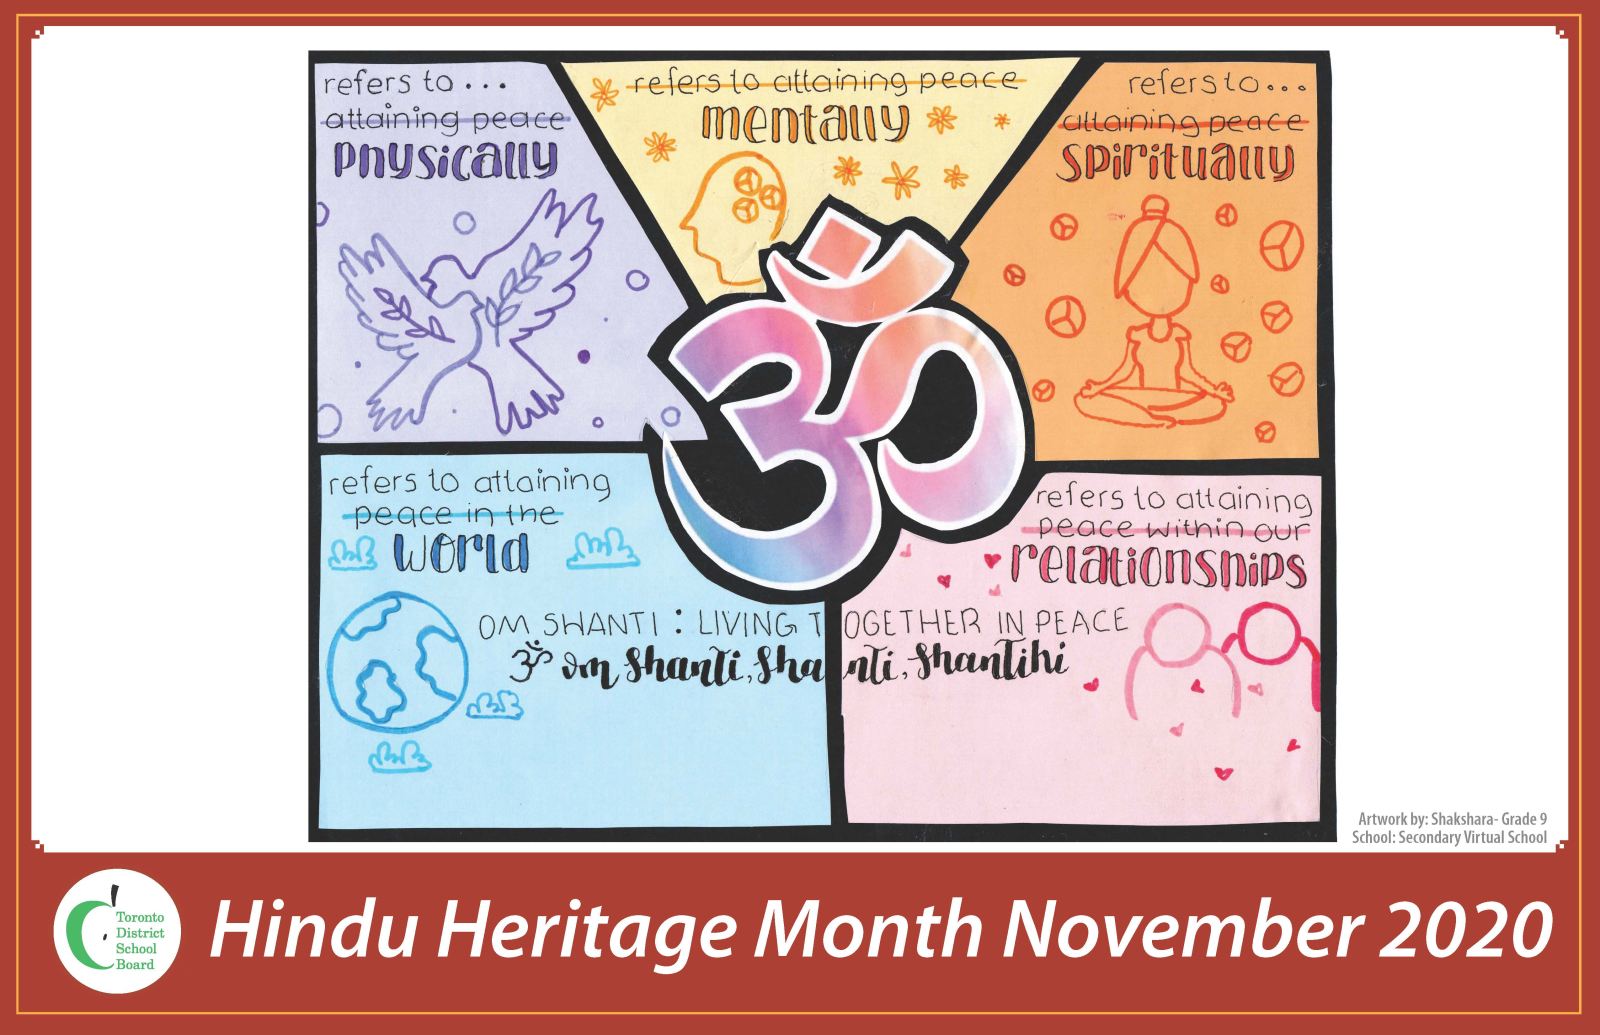 A Hindu Heritage Month poster designed by a Grade 9 student in the Virtual School shows five aspects of living together in peace.